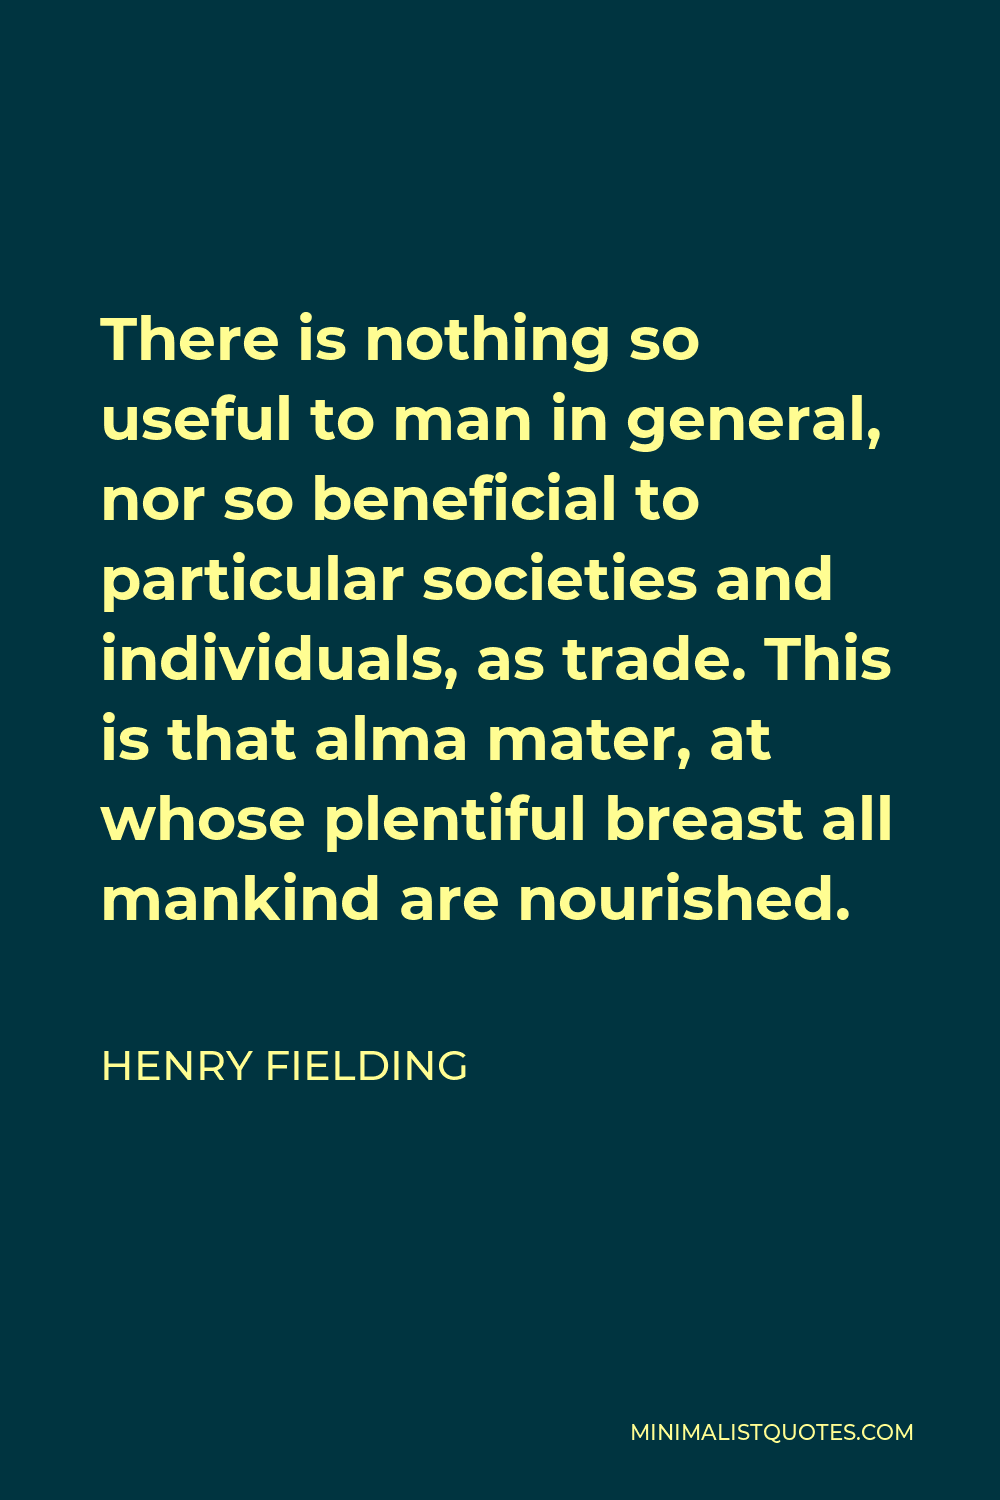 Henry Fielding Quote - There is nothing so useful to man in general, nor so beneficial to particular societies and individuals, as trade. This is that alma mater, at whose plentiful breast all mankind are nourished.